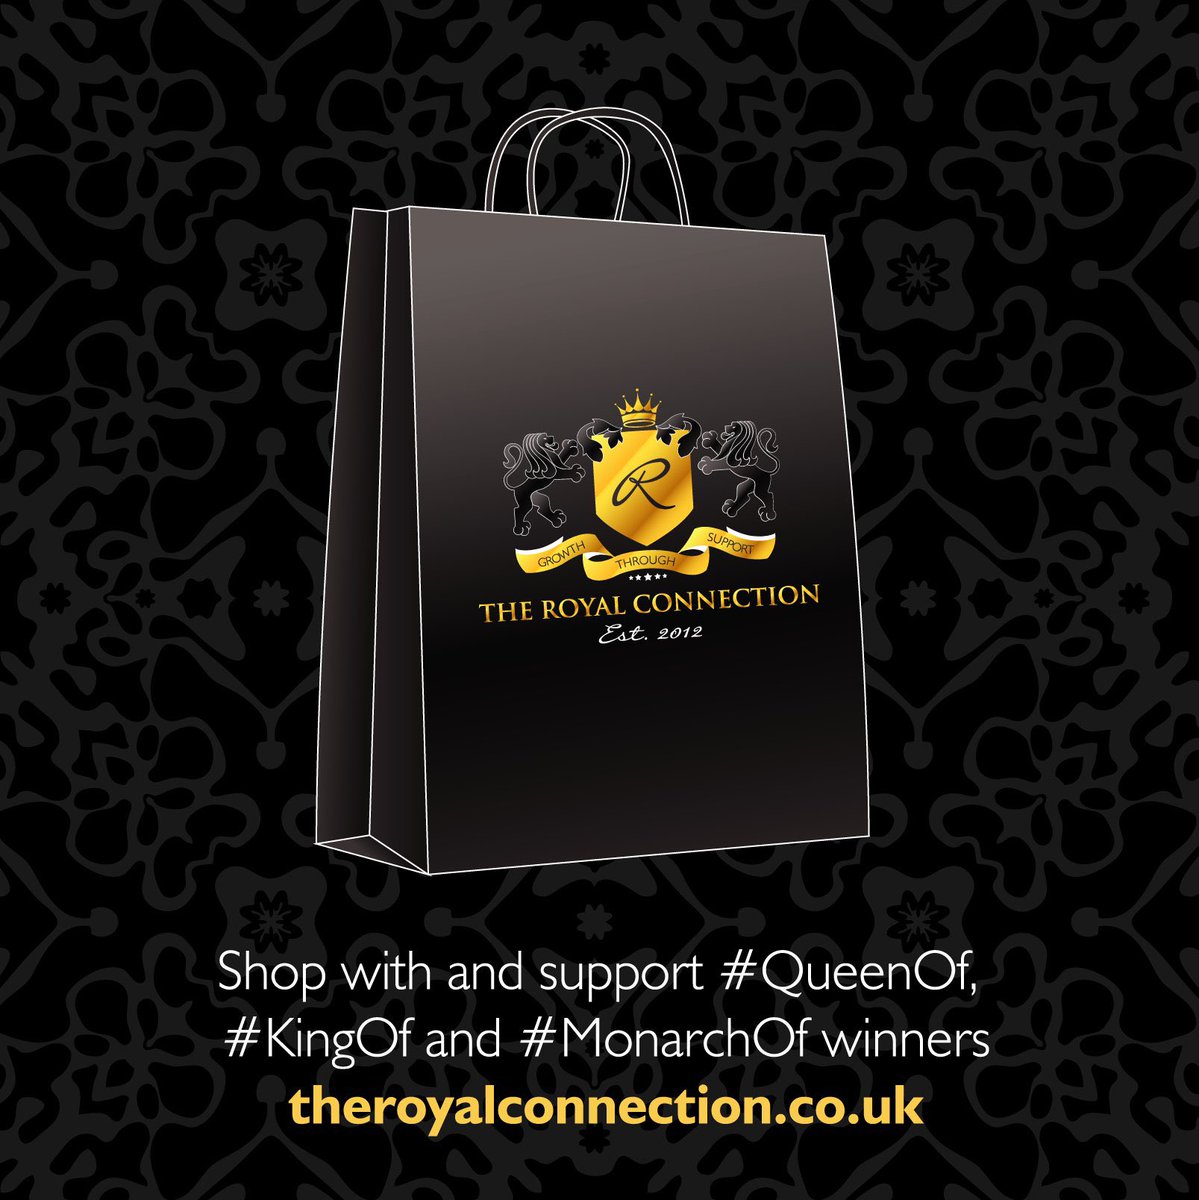 Explore the possibilities as a #smallbusiness and check out theroyalconnection.co.uk to discover what’s on offer from #QueenOf, #KingOf & #MonarchOf winners across the town! :-) #SmallBusiness #Male #Entrepreneur #FemaleEntrepreneur #LGBTQ #SmallBizFridayUK